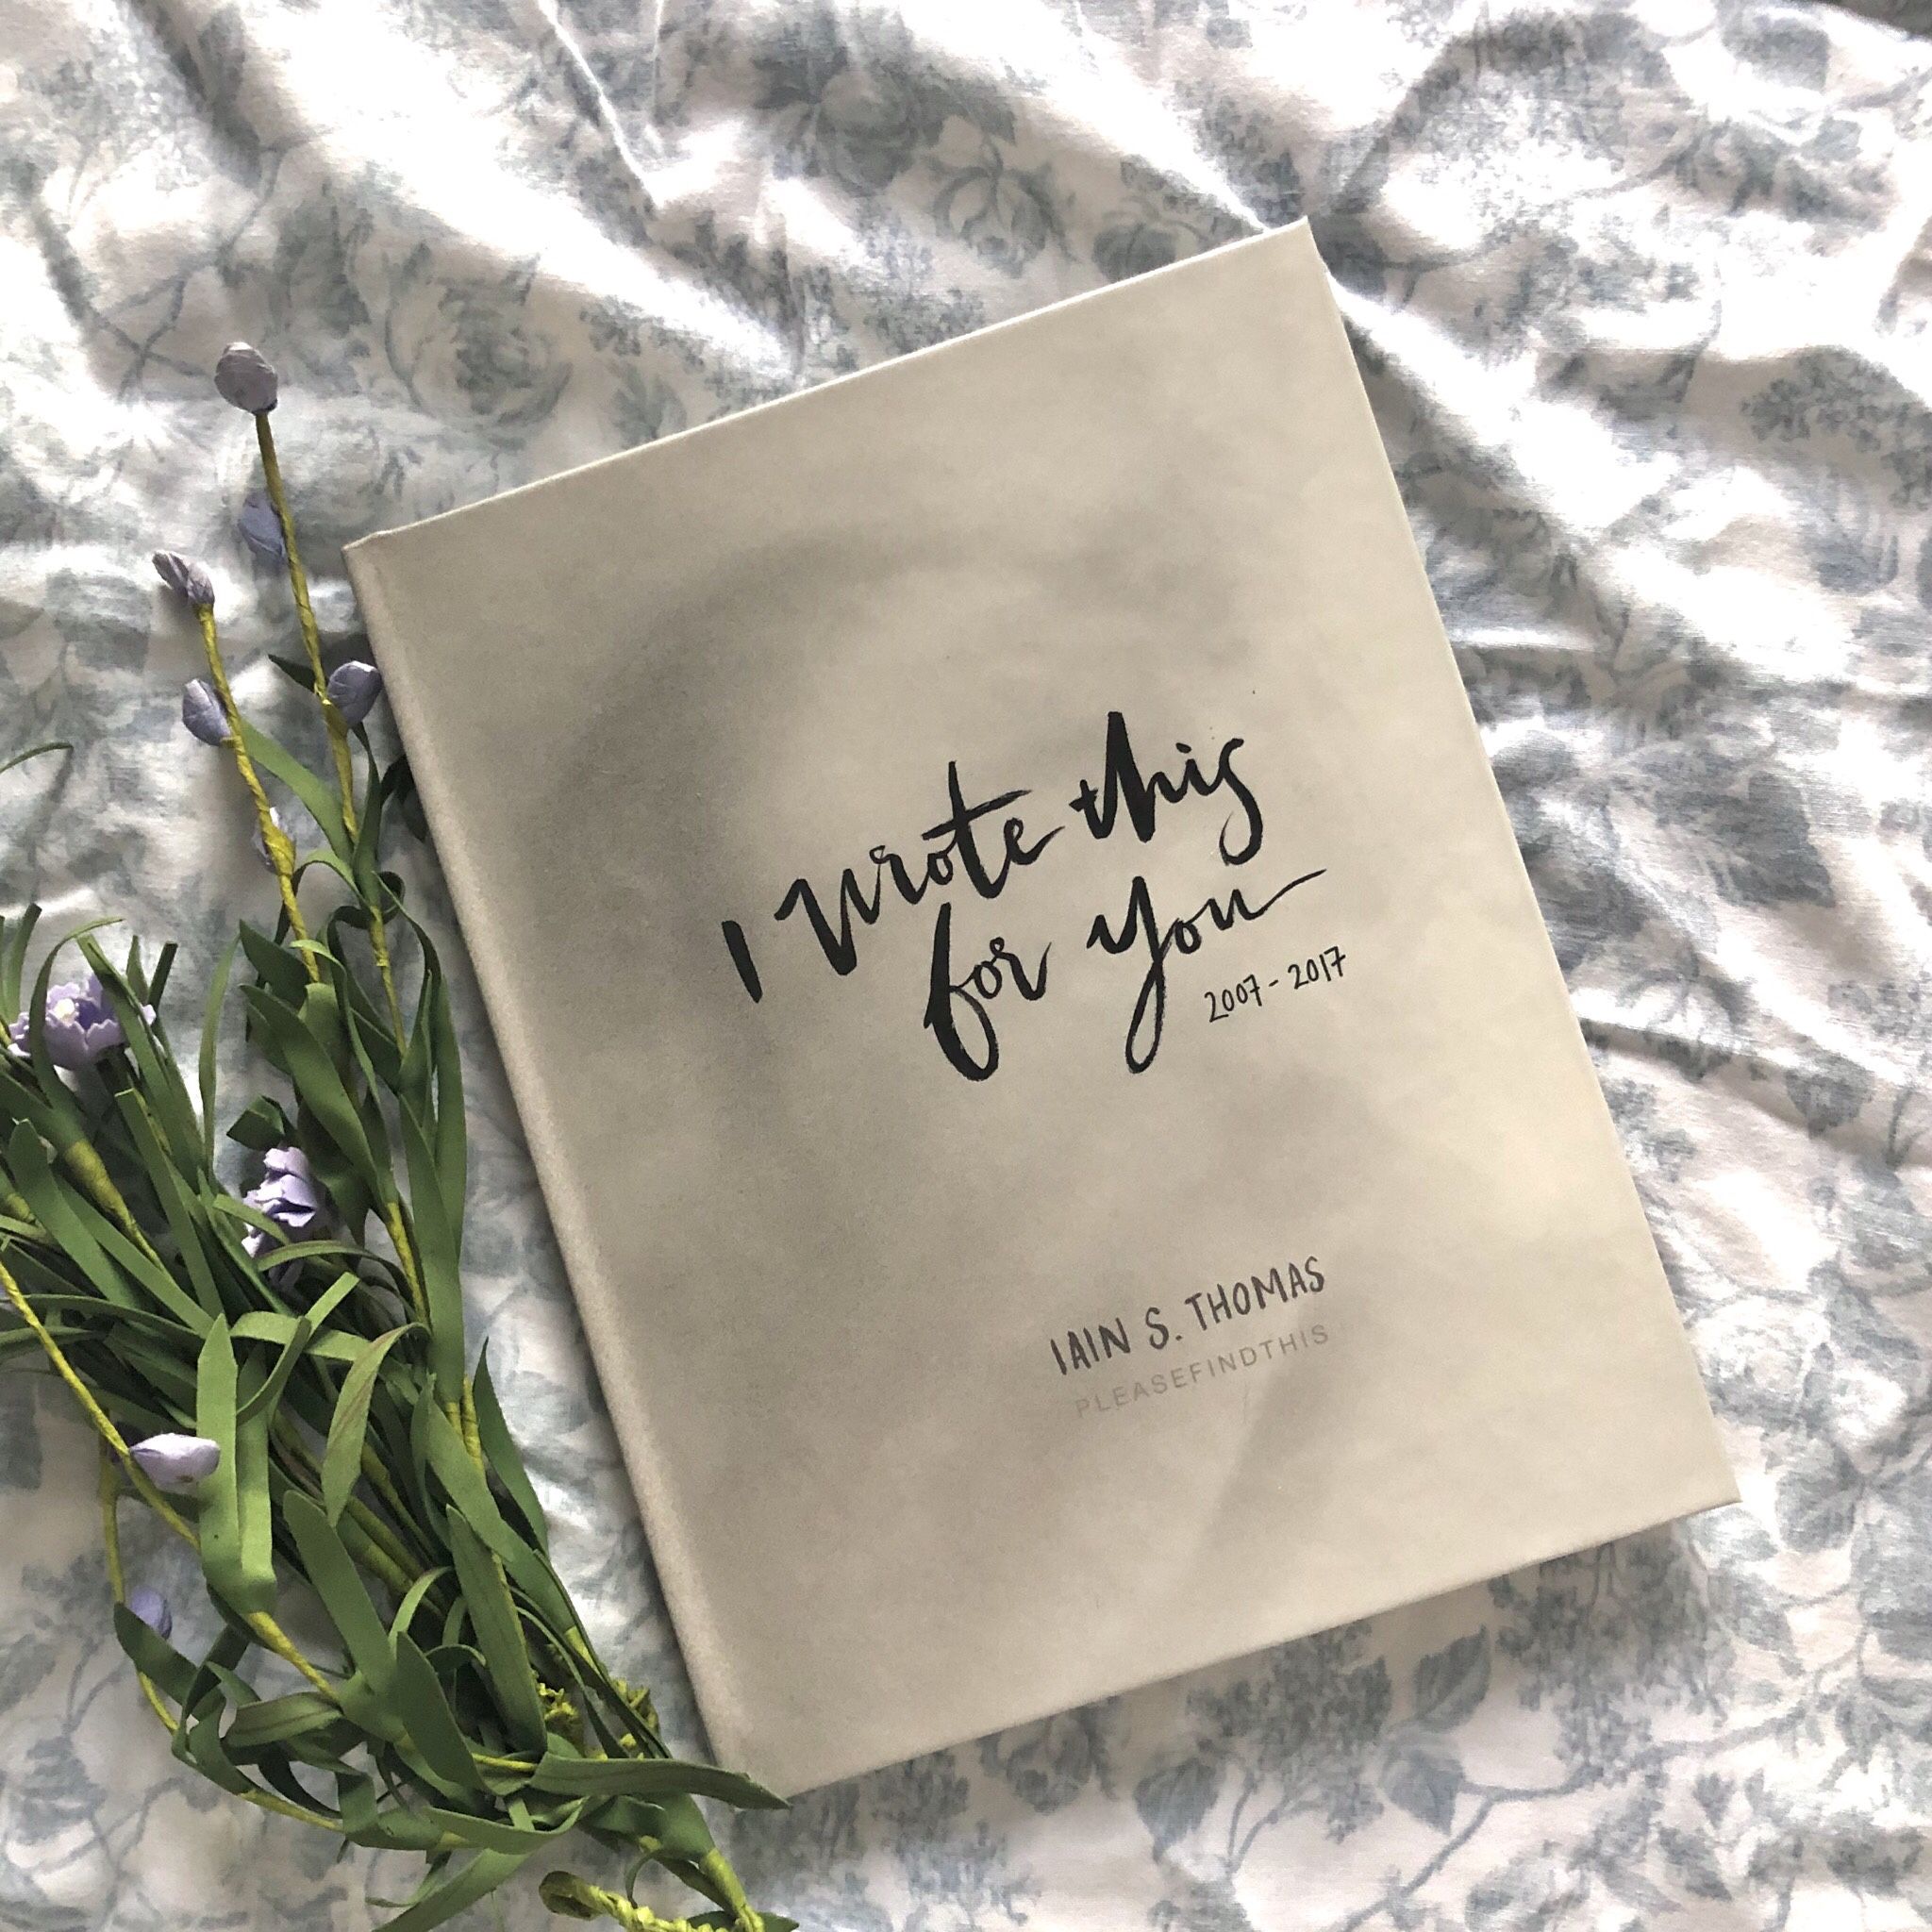 I Wrote This For You by Iain S Thomas